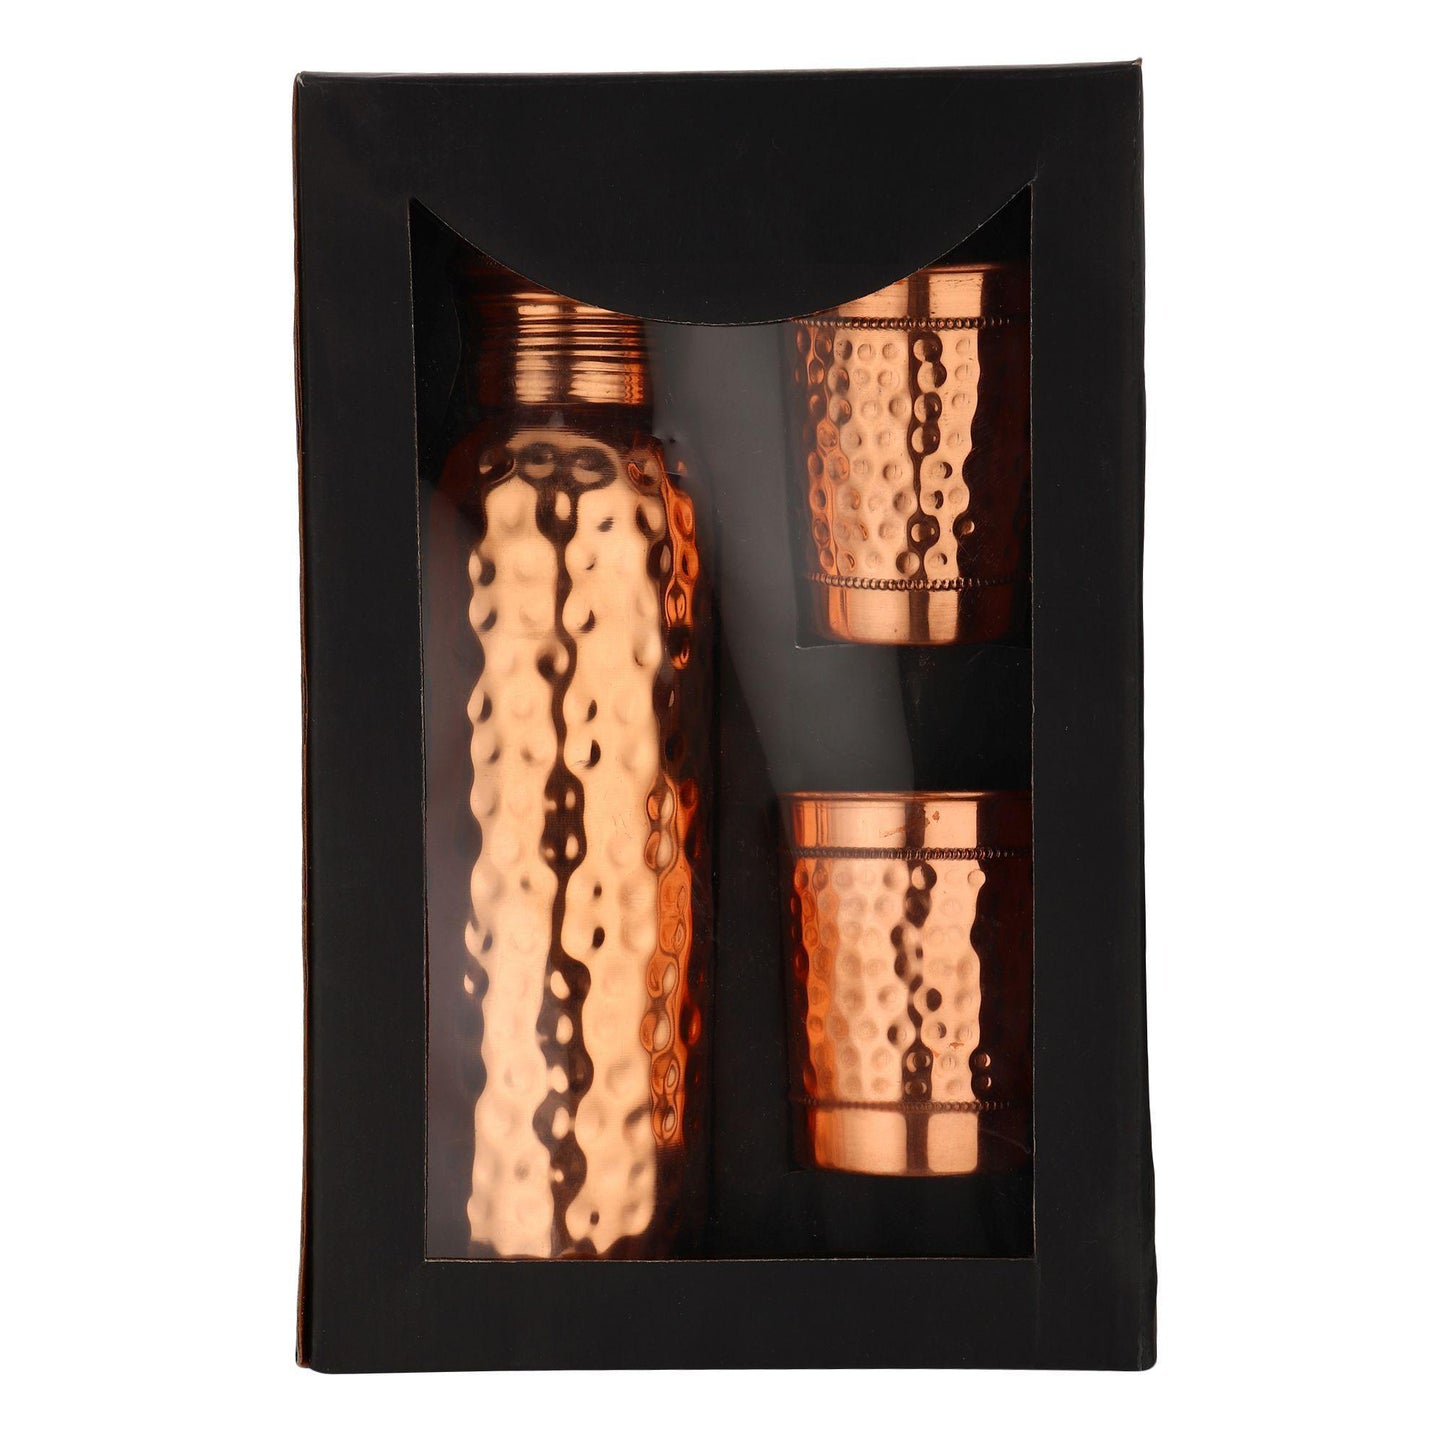 Hammered Style Diamond Cut Copper Bottle with Glass-Diamond Cut Copper Bottle with Glass-ONESKYSHOP